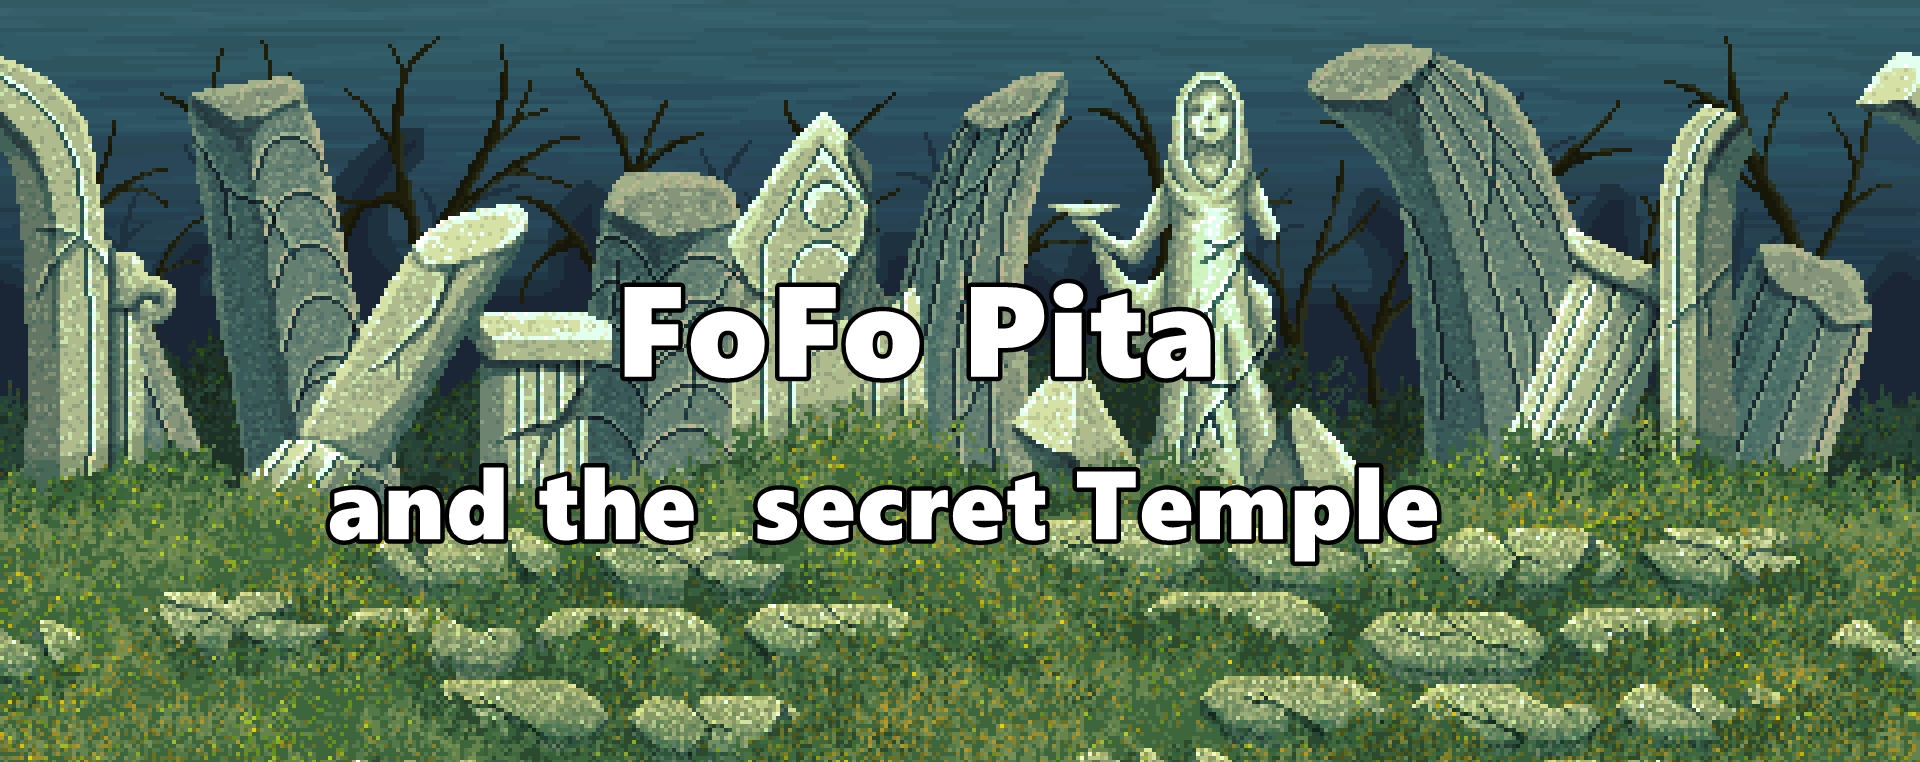 fofo pita and the secret temple